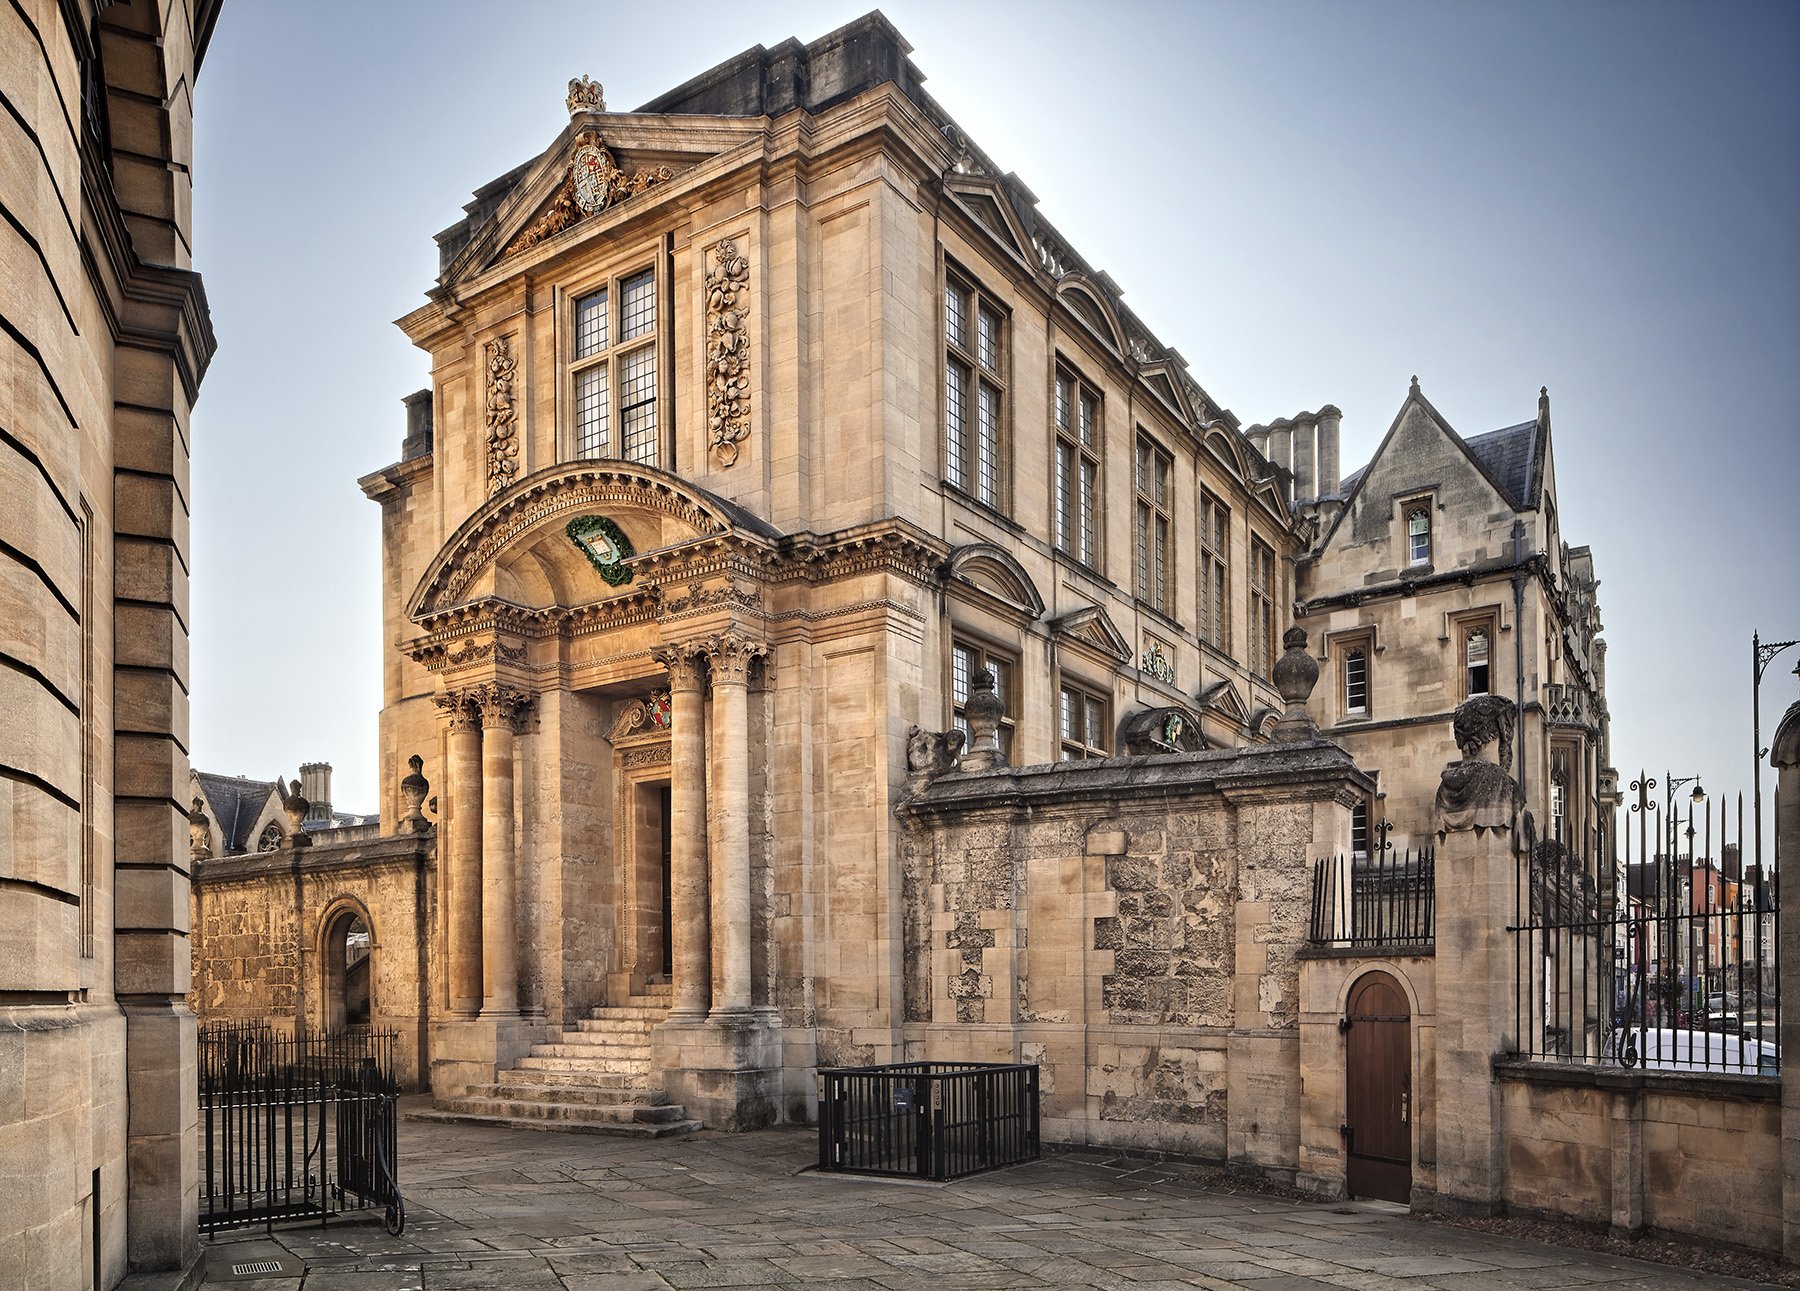  Photography by Dan Paton for the book - Historic Heart of Oxford by Prof Geoffrey Tyack published by Bodleian Publishing 